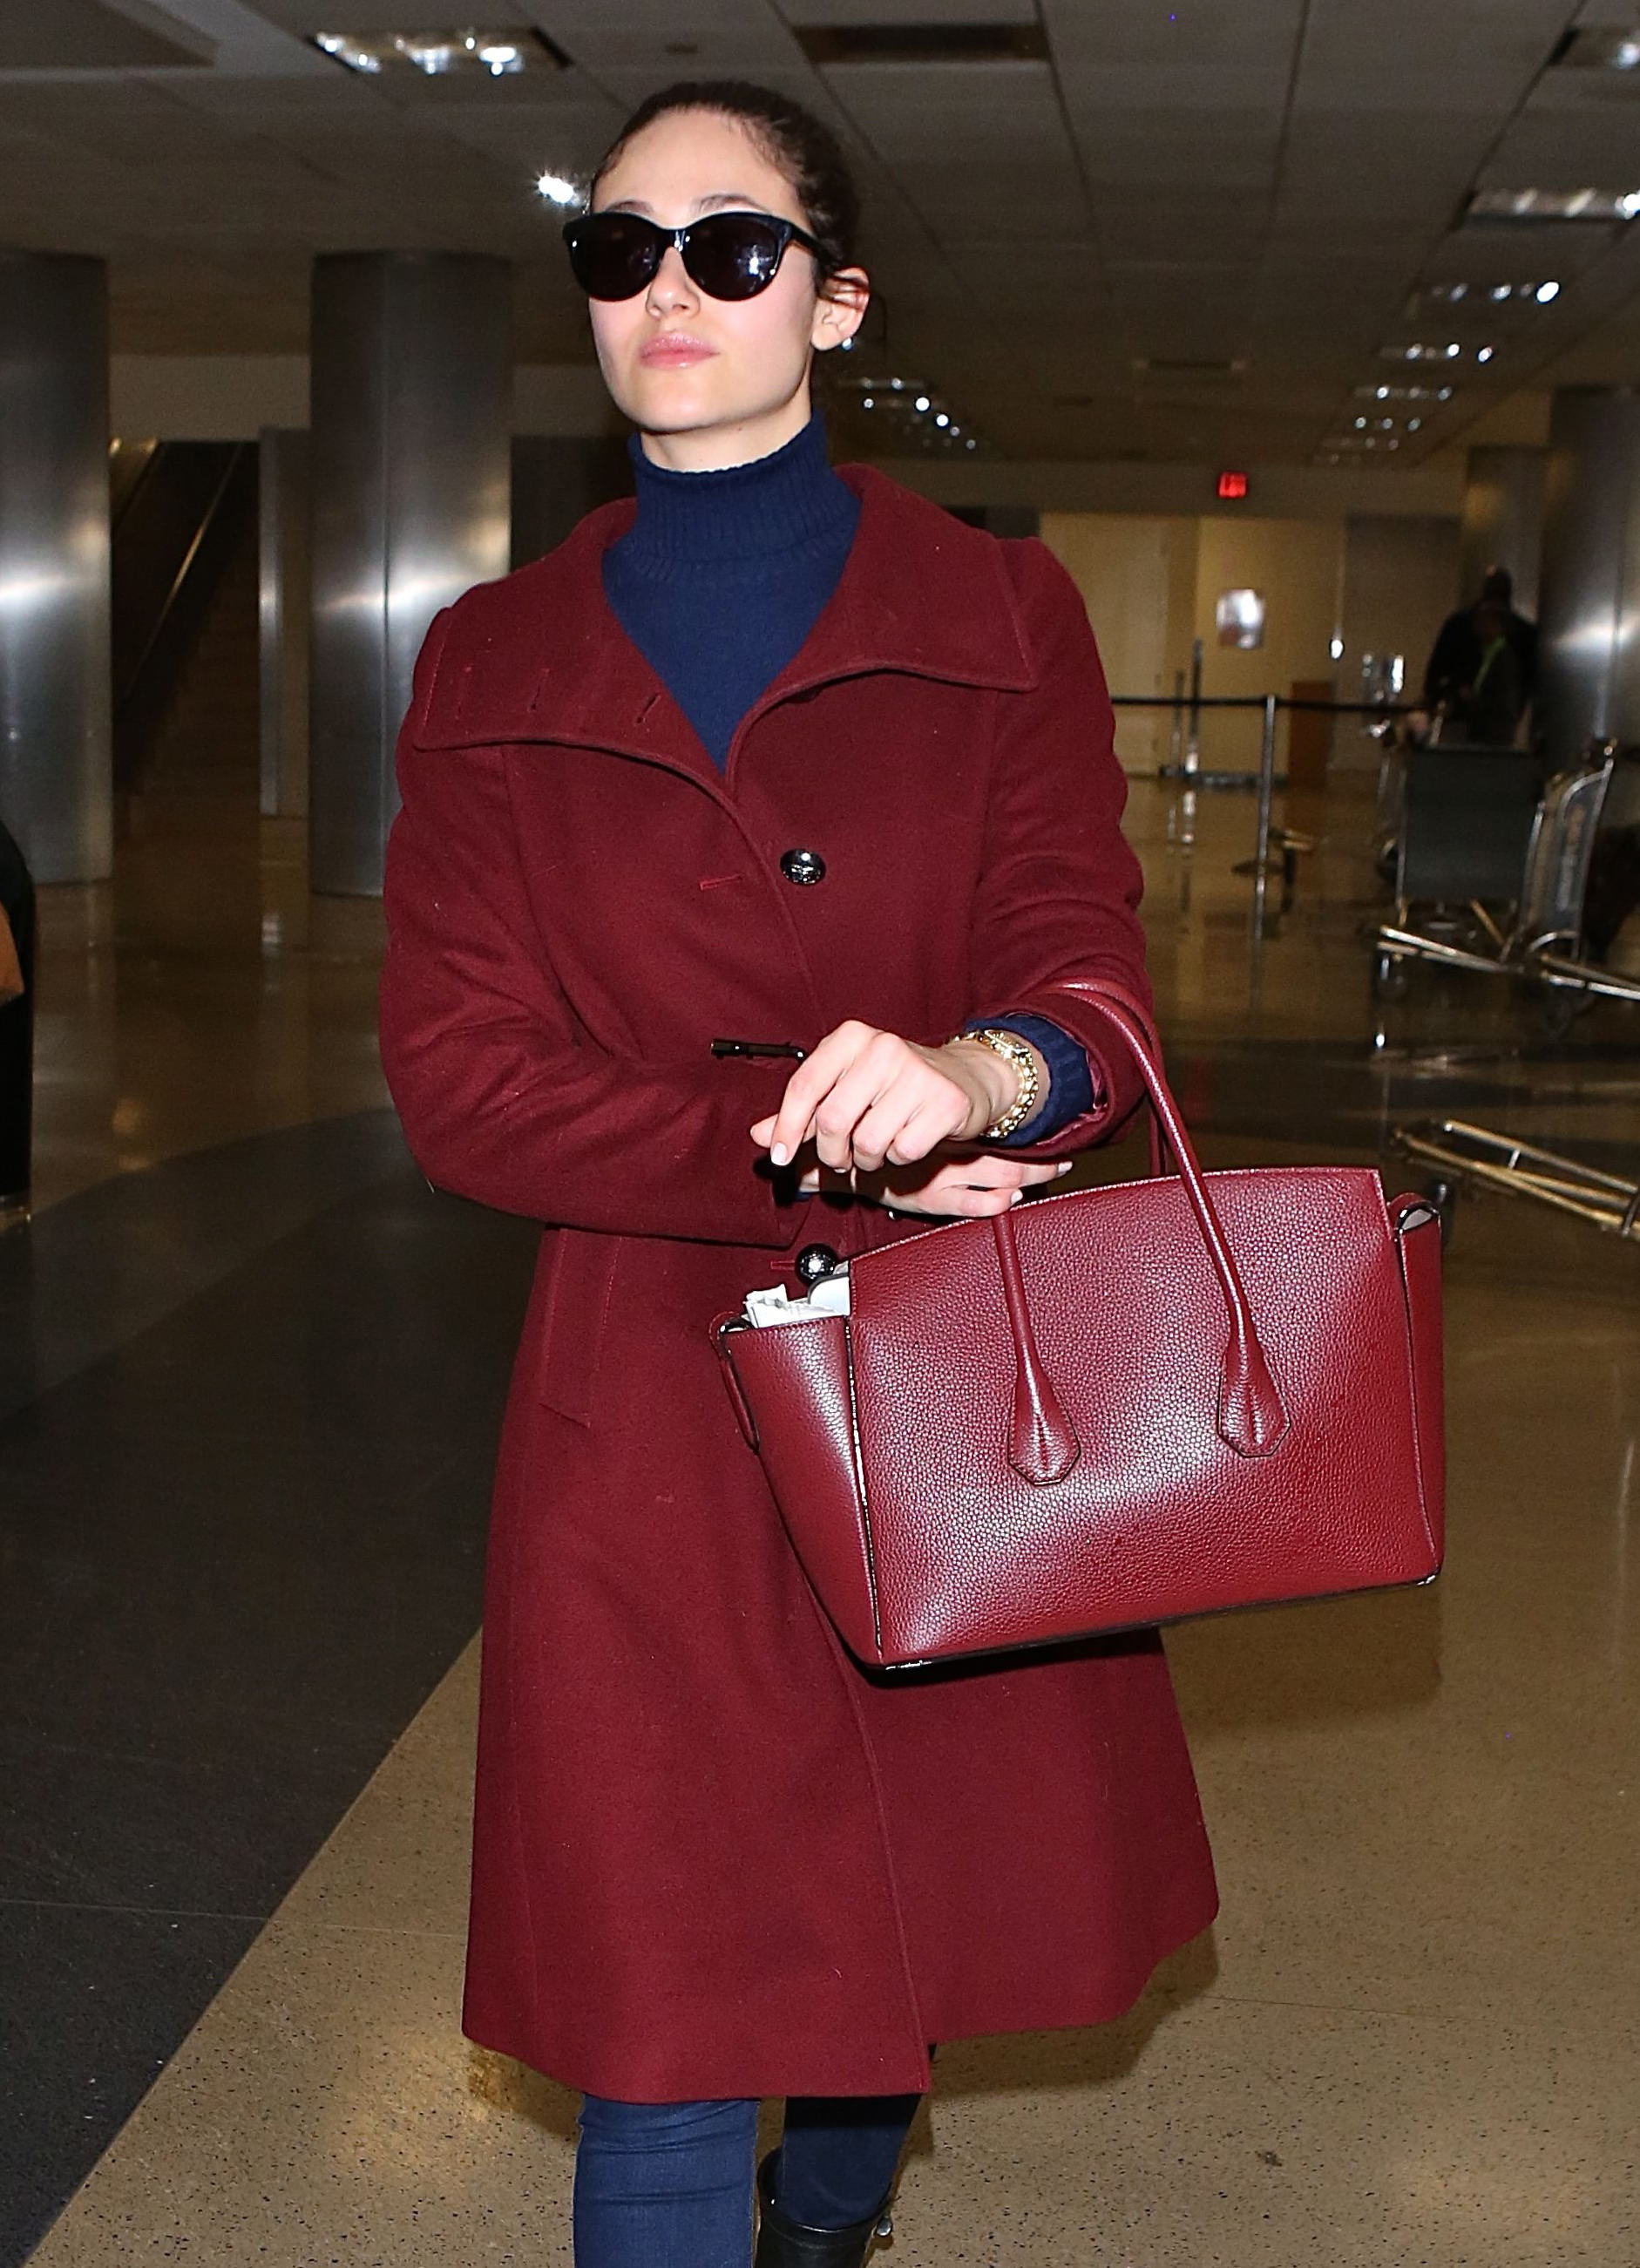 Emmy Rossum looks elegant as she arrives in Los Angeles at LAX